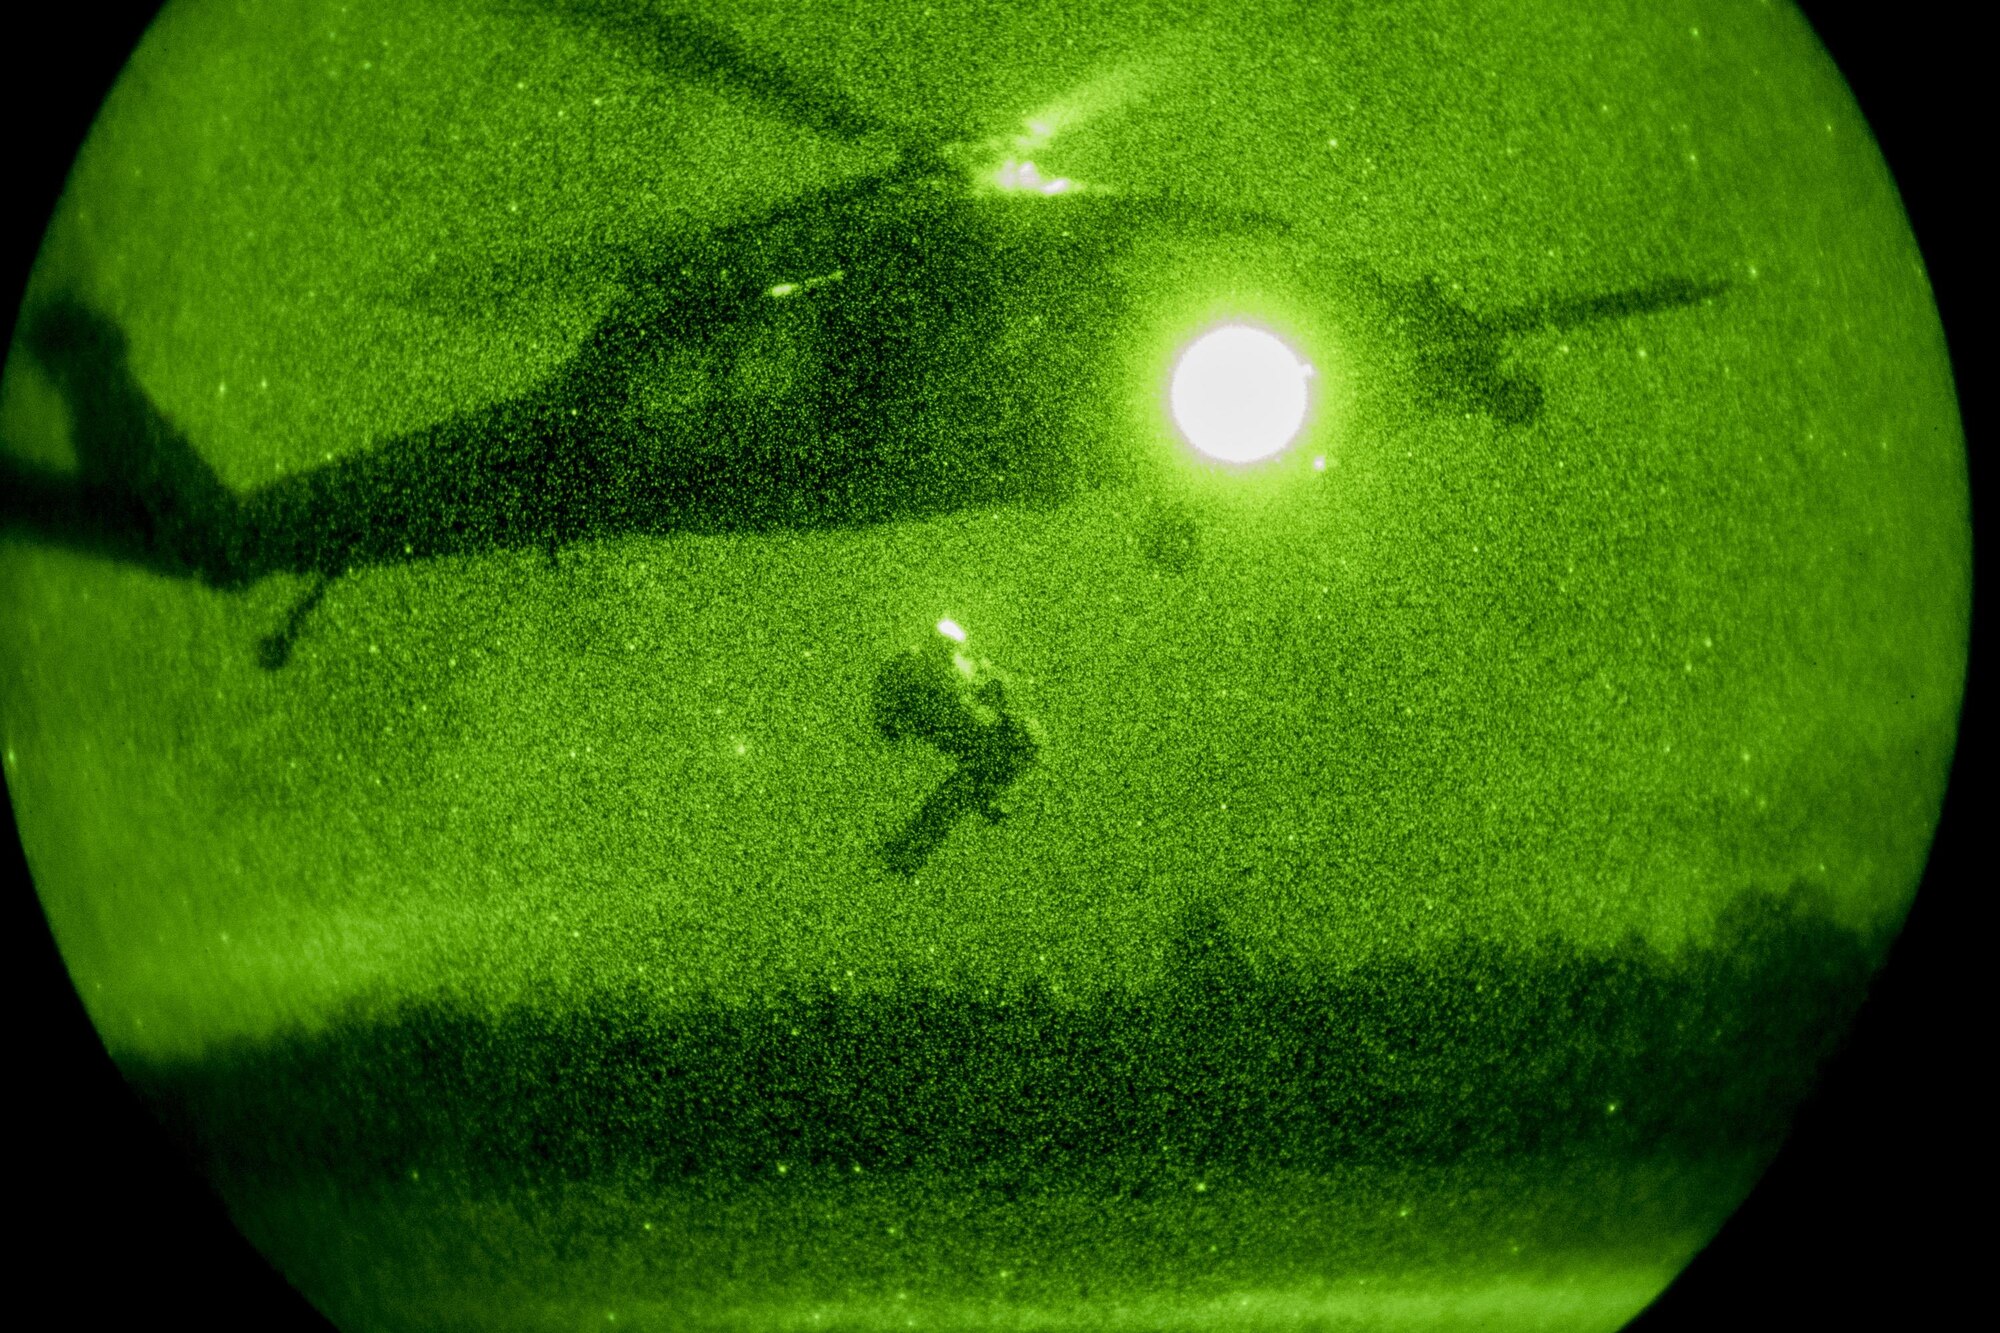 Pararescueman from the 38th Rescue Squadron extract a casualty into a hovering HH-60G Pave Hawk under the cover of darkness during a rescue exercise, June 21, 2017, at Bemiss Field landing zone, Ga. The Air Force Research Laboratory from Wright-Patterson Air Force Base, Ohio and the Baltimore U.S. Air Force Center for Sustainment of Trauma and Readiness Skills, observed Moody's Combat Search and Rescue aeromedical patient processes and survival kit technology, in hopes of reducing risks to improve the overall Air Force mission. (U.S. Air Force photo by Airman 1st Class Daniel Snider)  